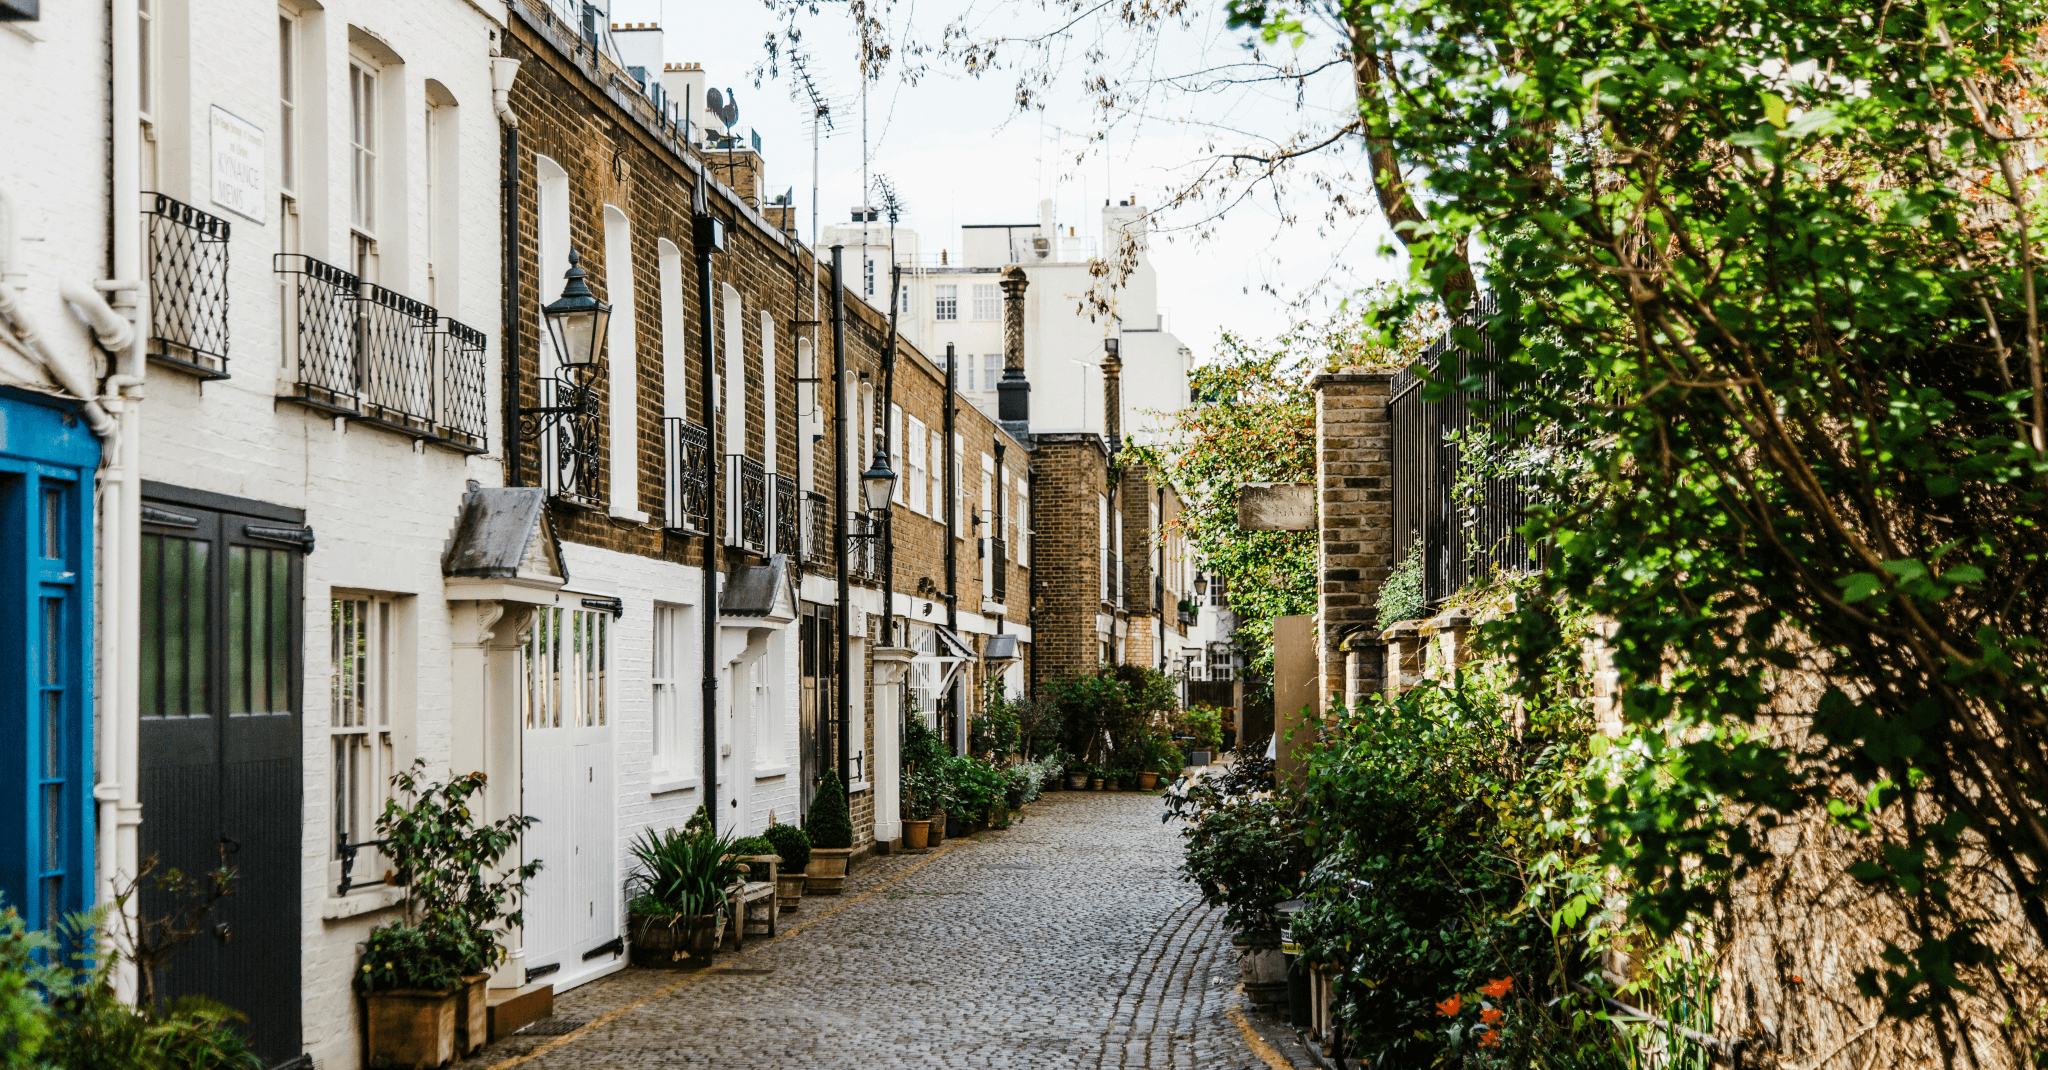 Photograph of a leafy, cobbled street in the UK lined with terraced houses.